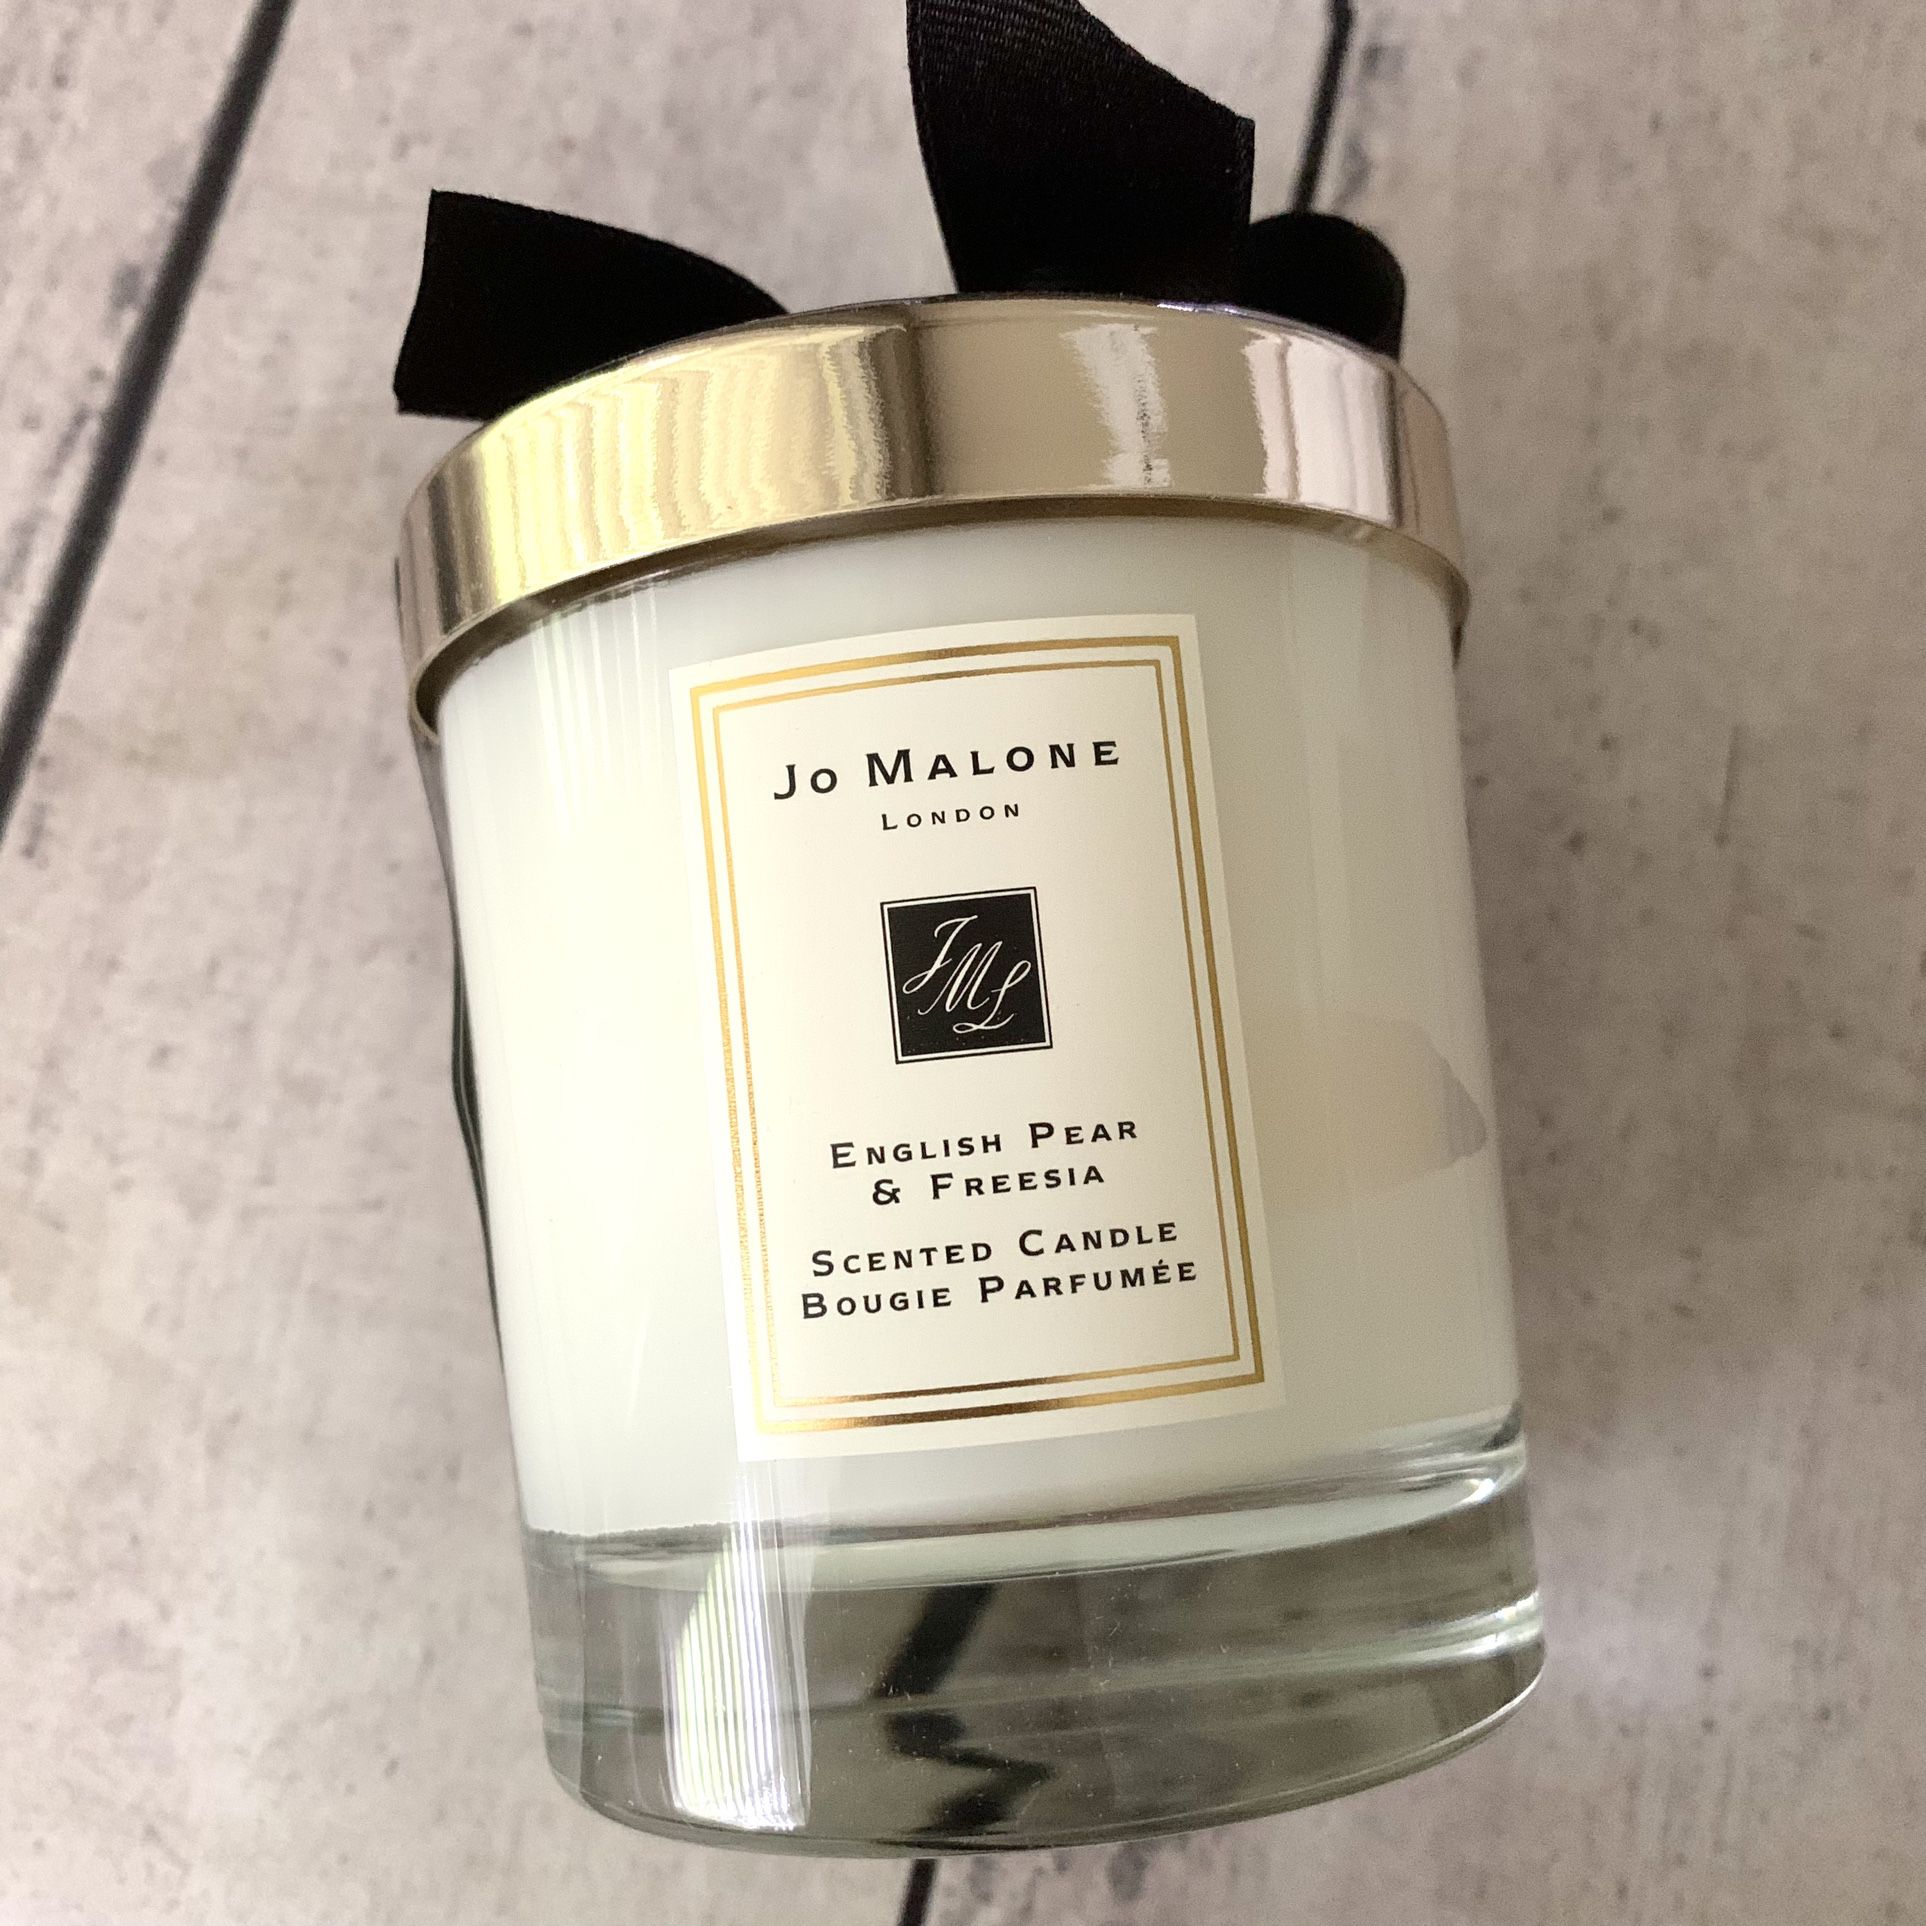 Jo Malone English Pear & Freesia Scented Candle - Full Size 2.5 In / 200 g